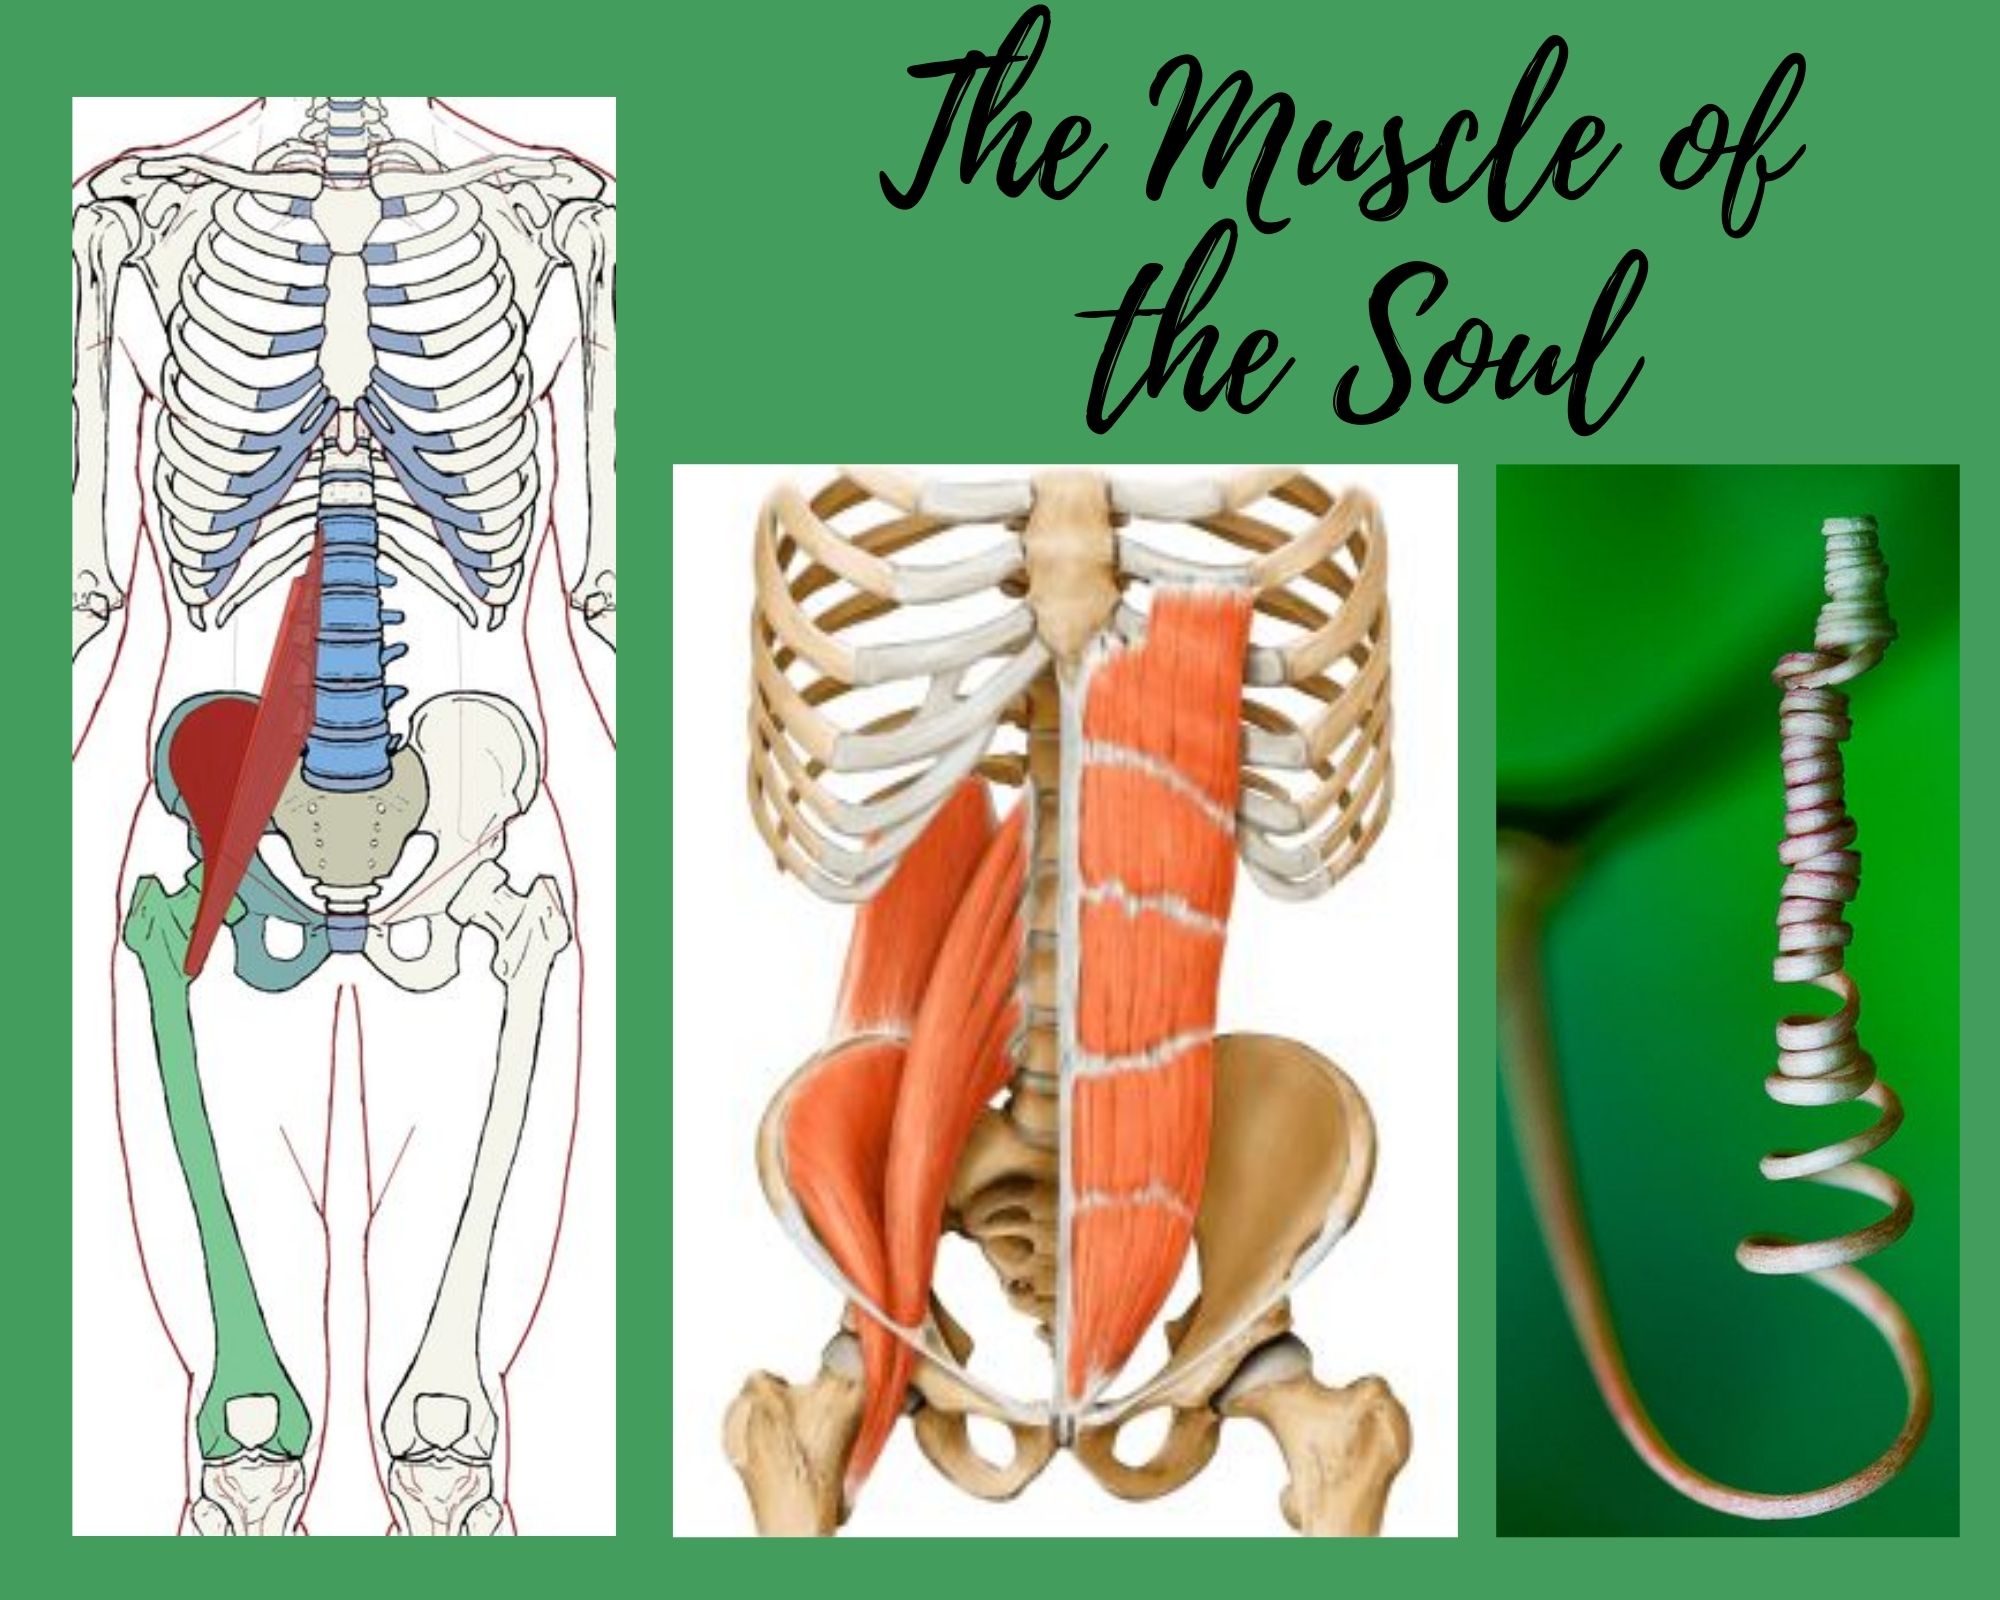 The Muscle of the Soul